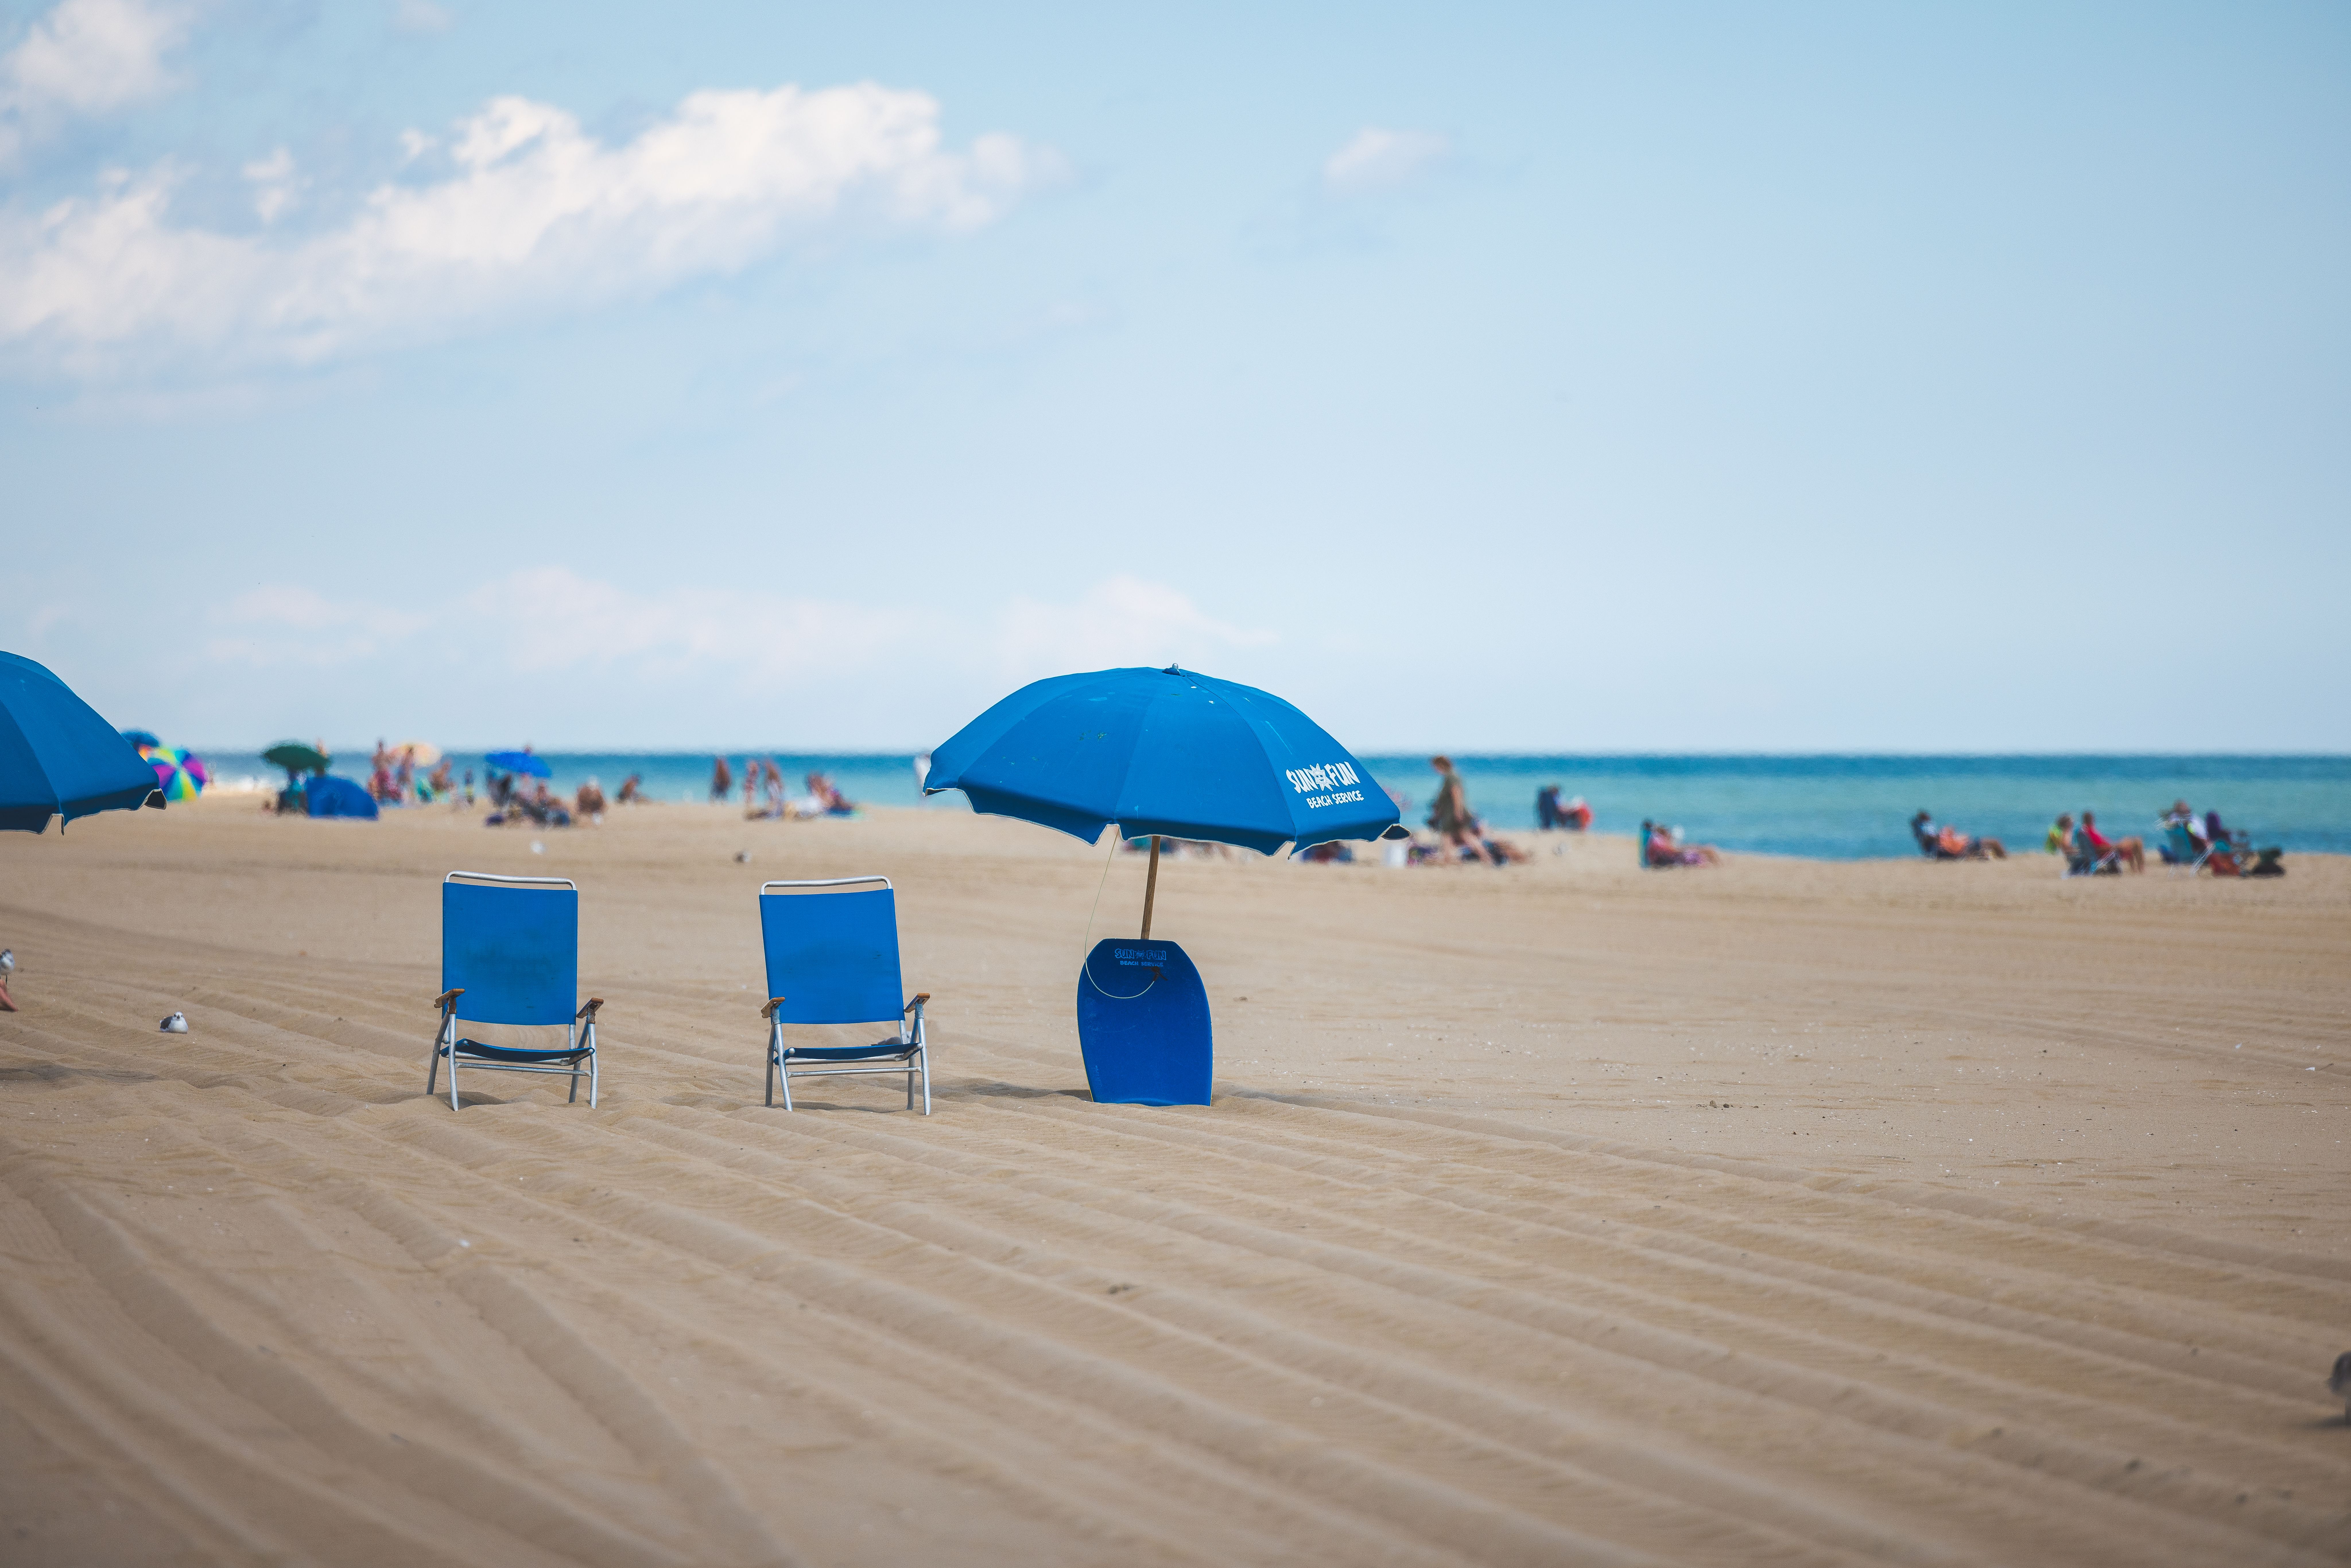 chairs and umbrellas on the beach with people in the background